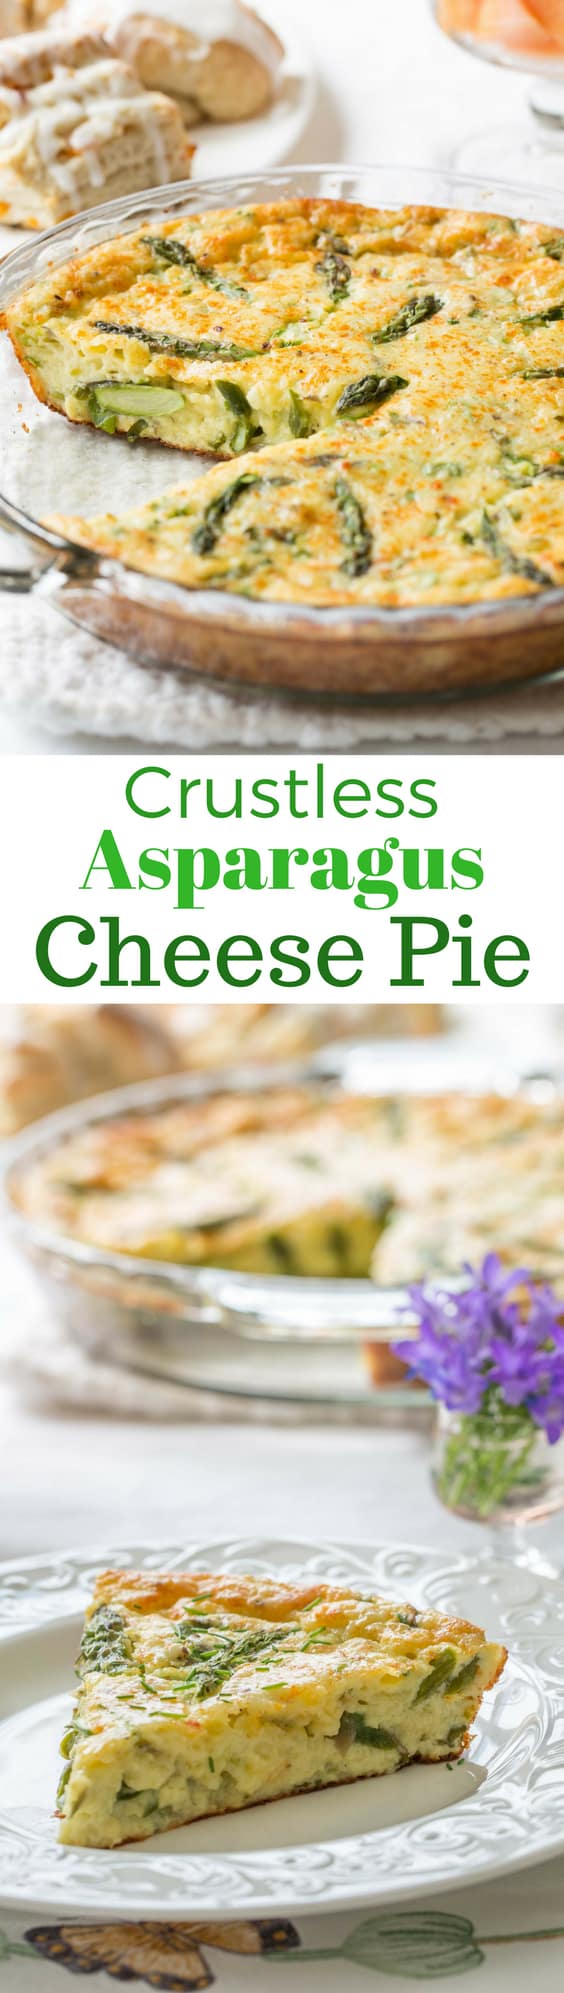 A wonderfully easy, and cheesy pie made with eggs, asparagus, and onions. A great brunch recipe served warm or at room temperature. www.savingdessert.com